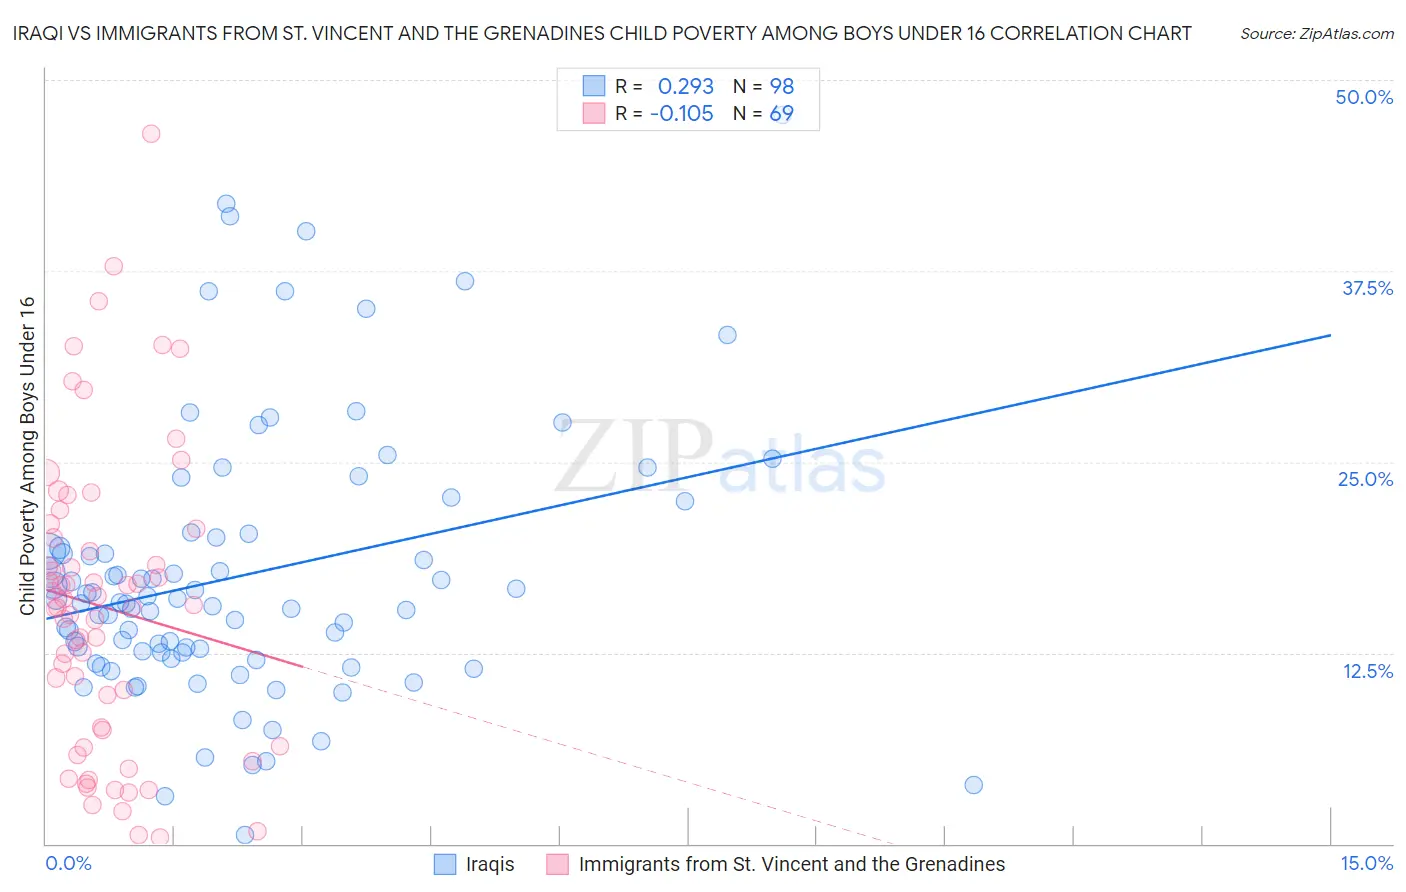 Iraqi vs Immigrants from St. Vincent and the Grenadines Child Poverty Among Boys Under 16